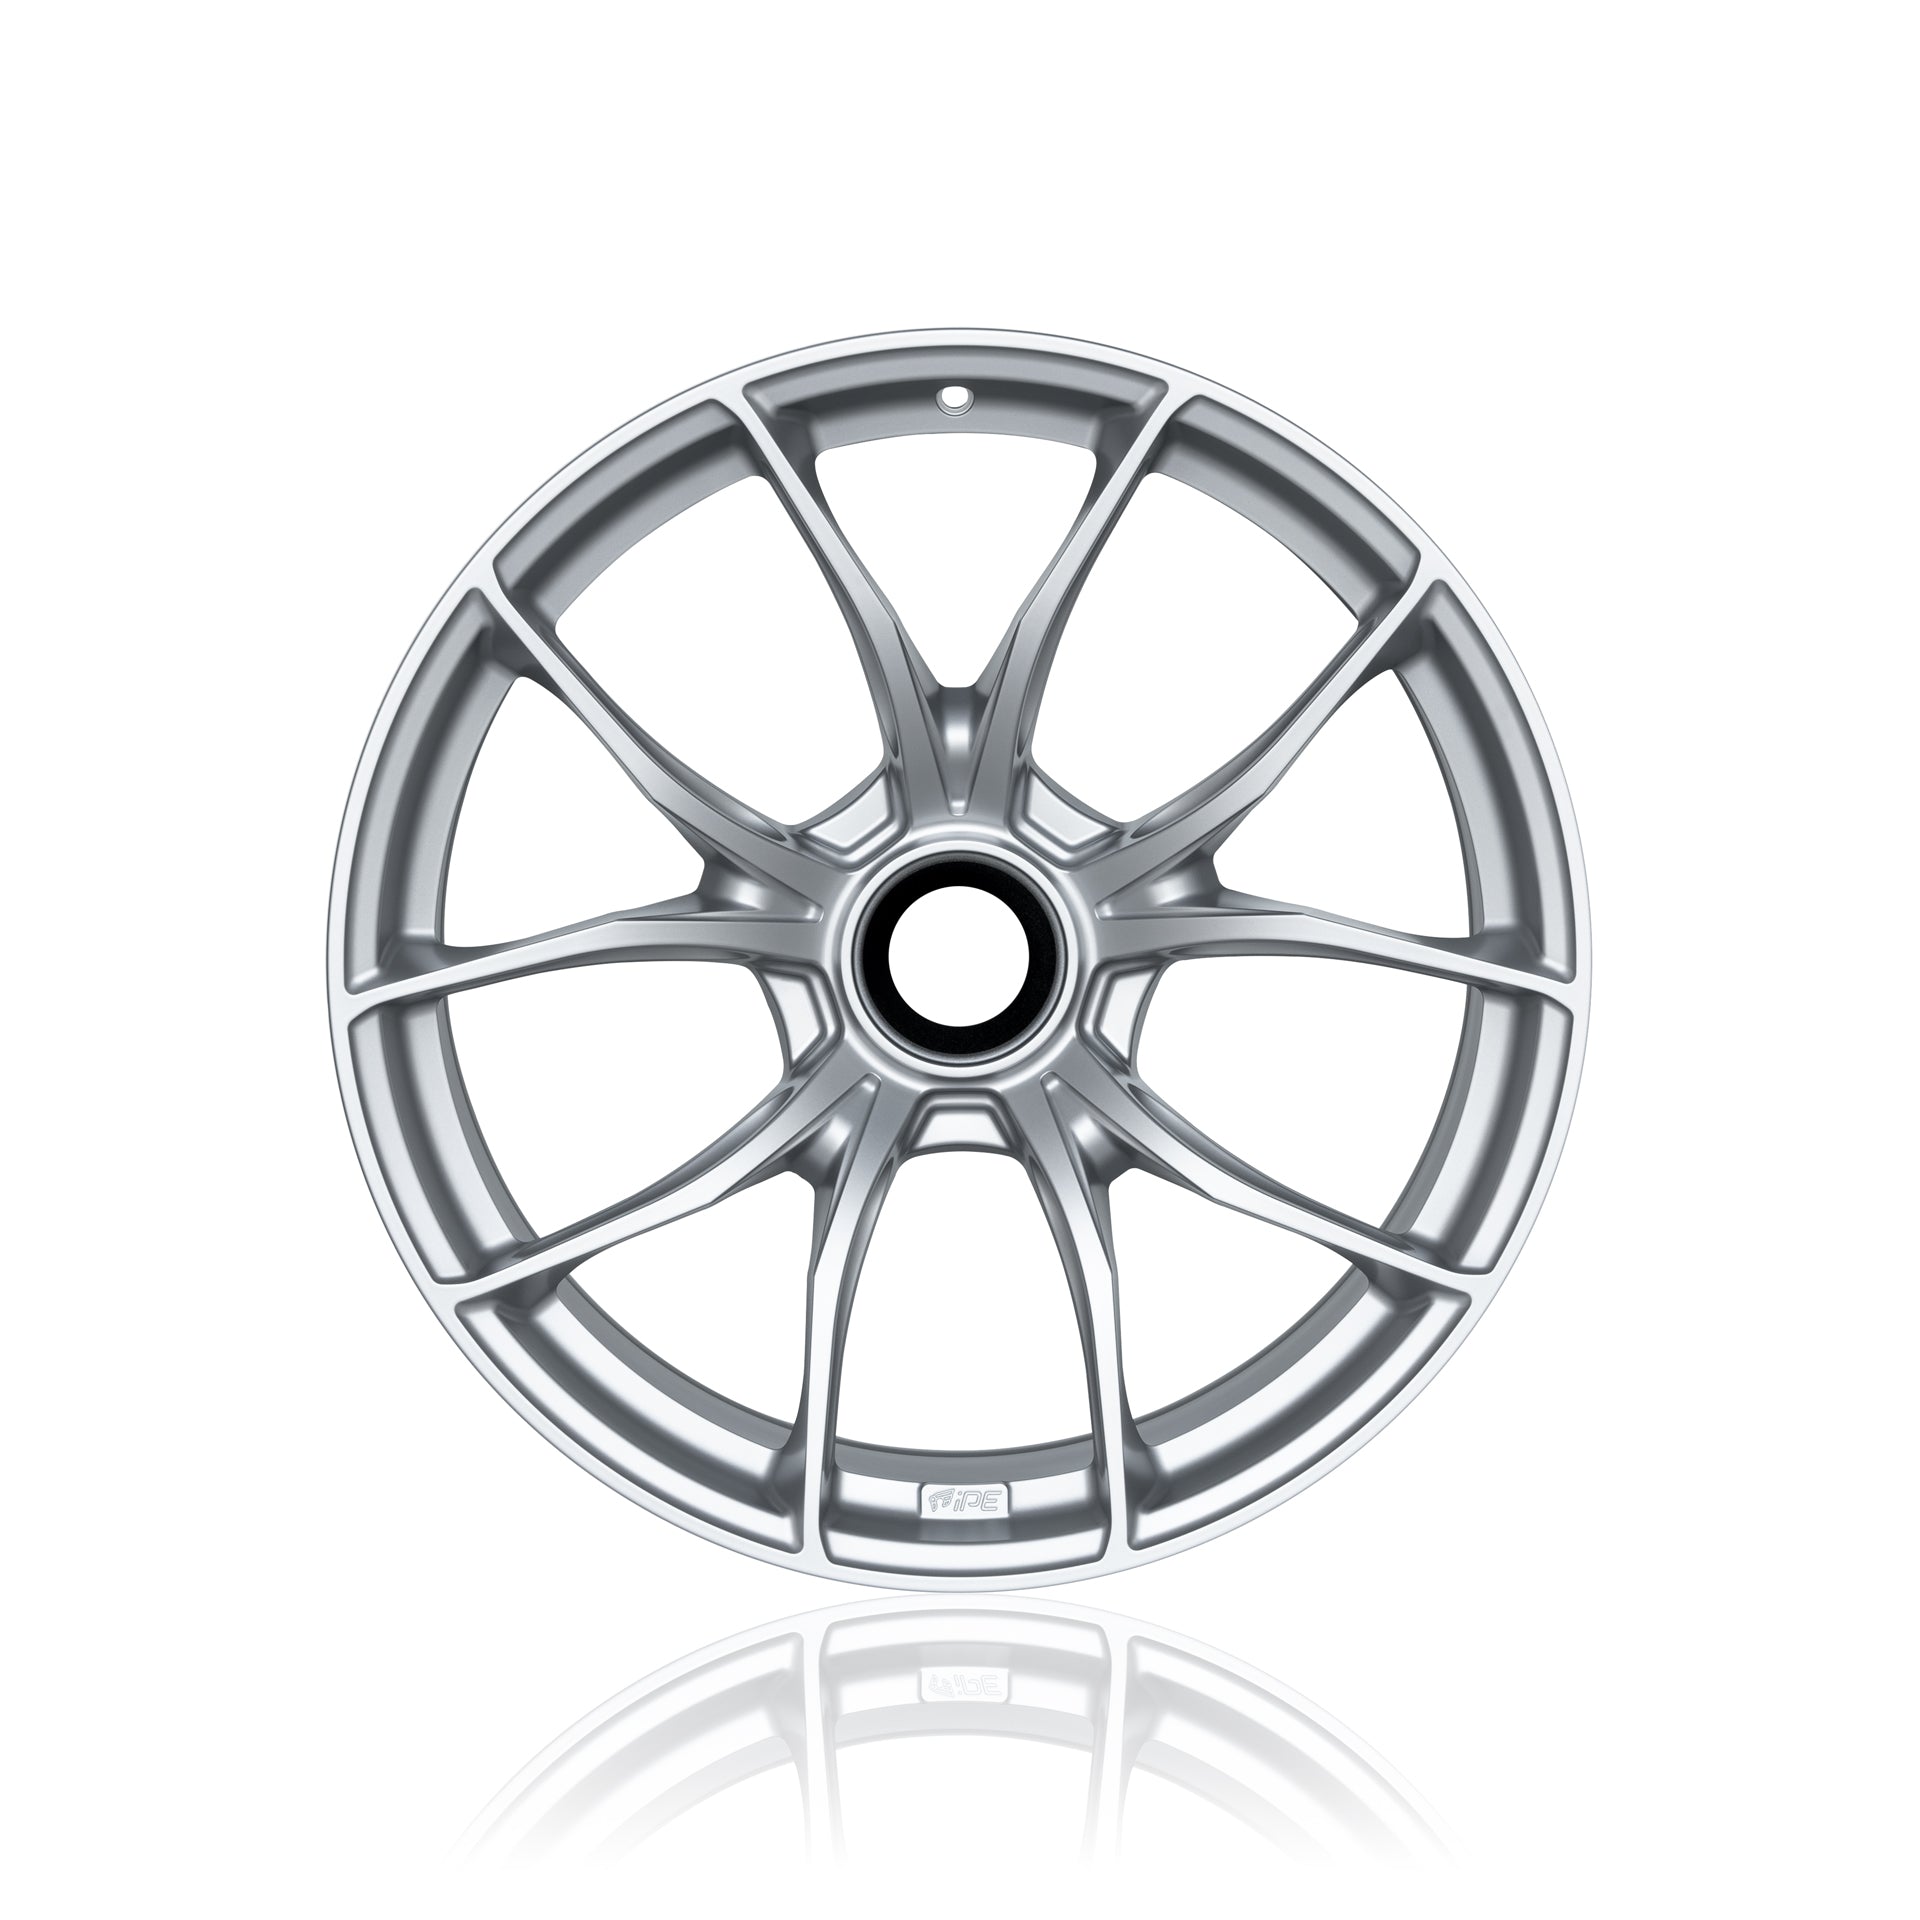 Front view of an IPE MFR-01 Magnesium wheel in silver with a multi-spoke design against a white background